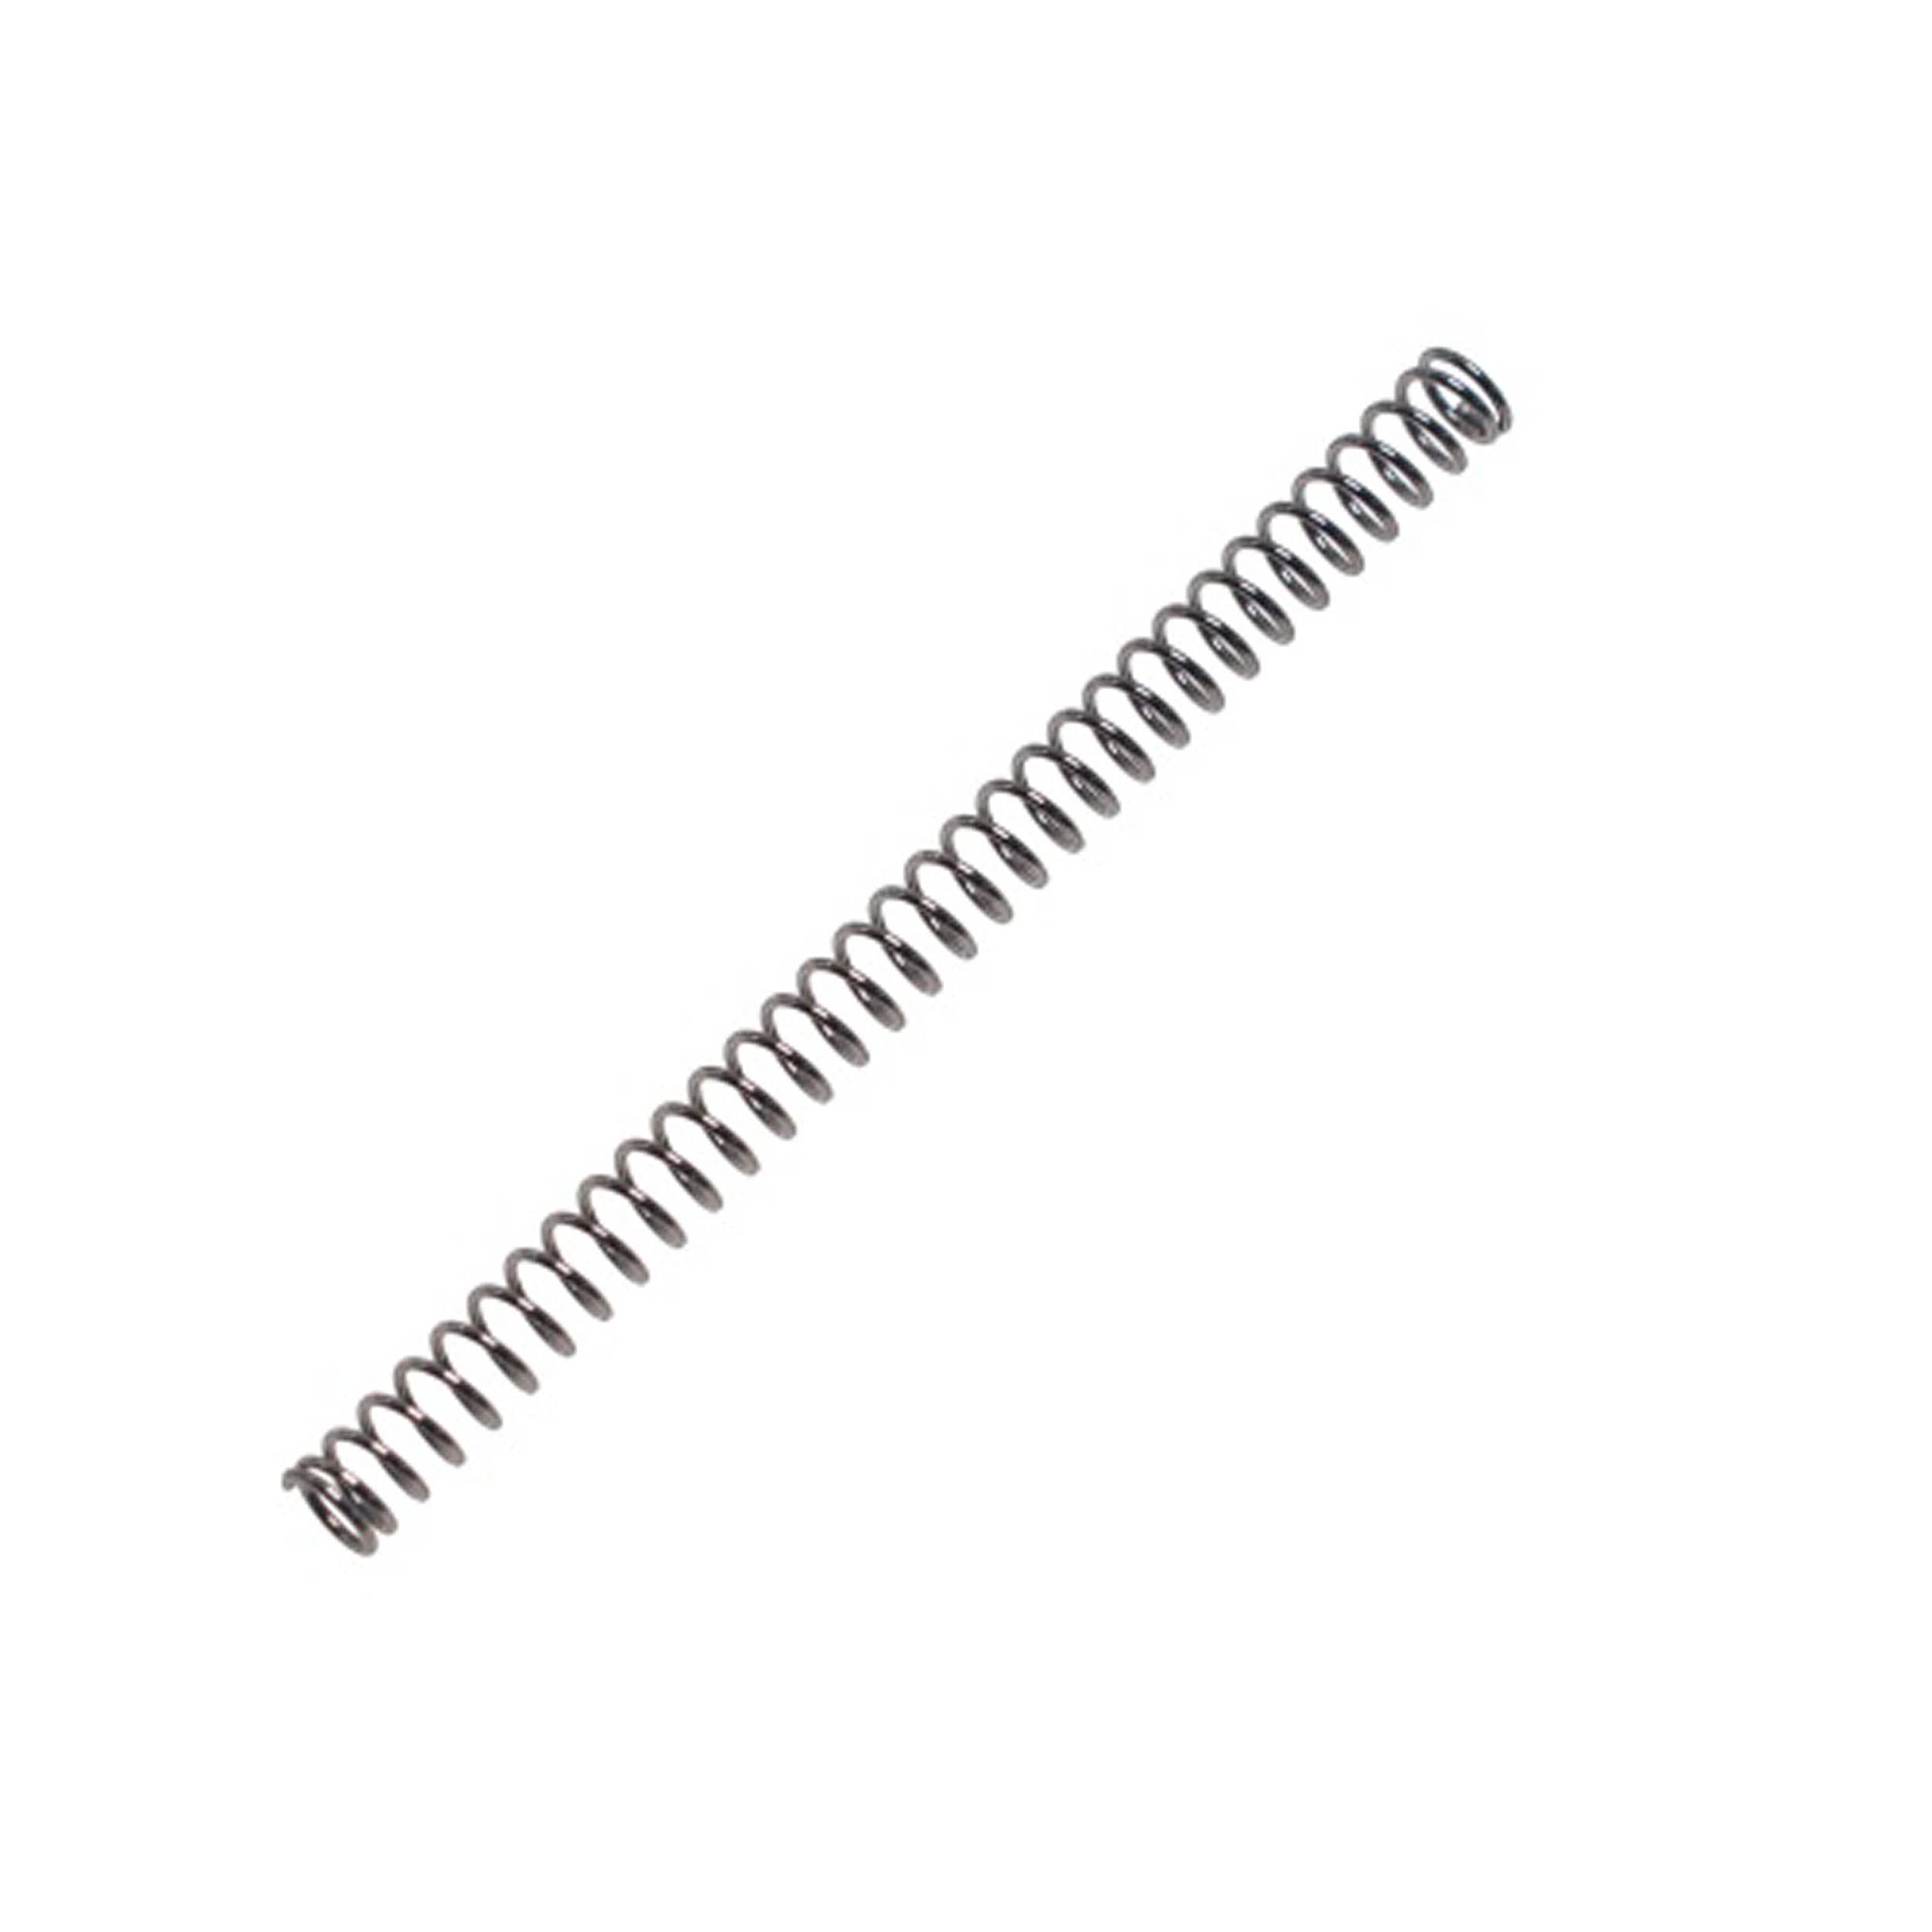 Nozzle spring 200% for AAP-01 CowCow